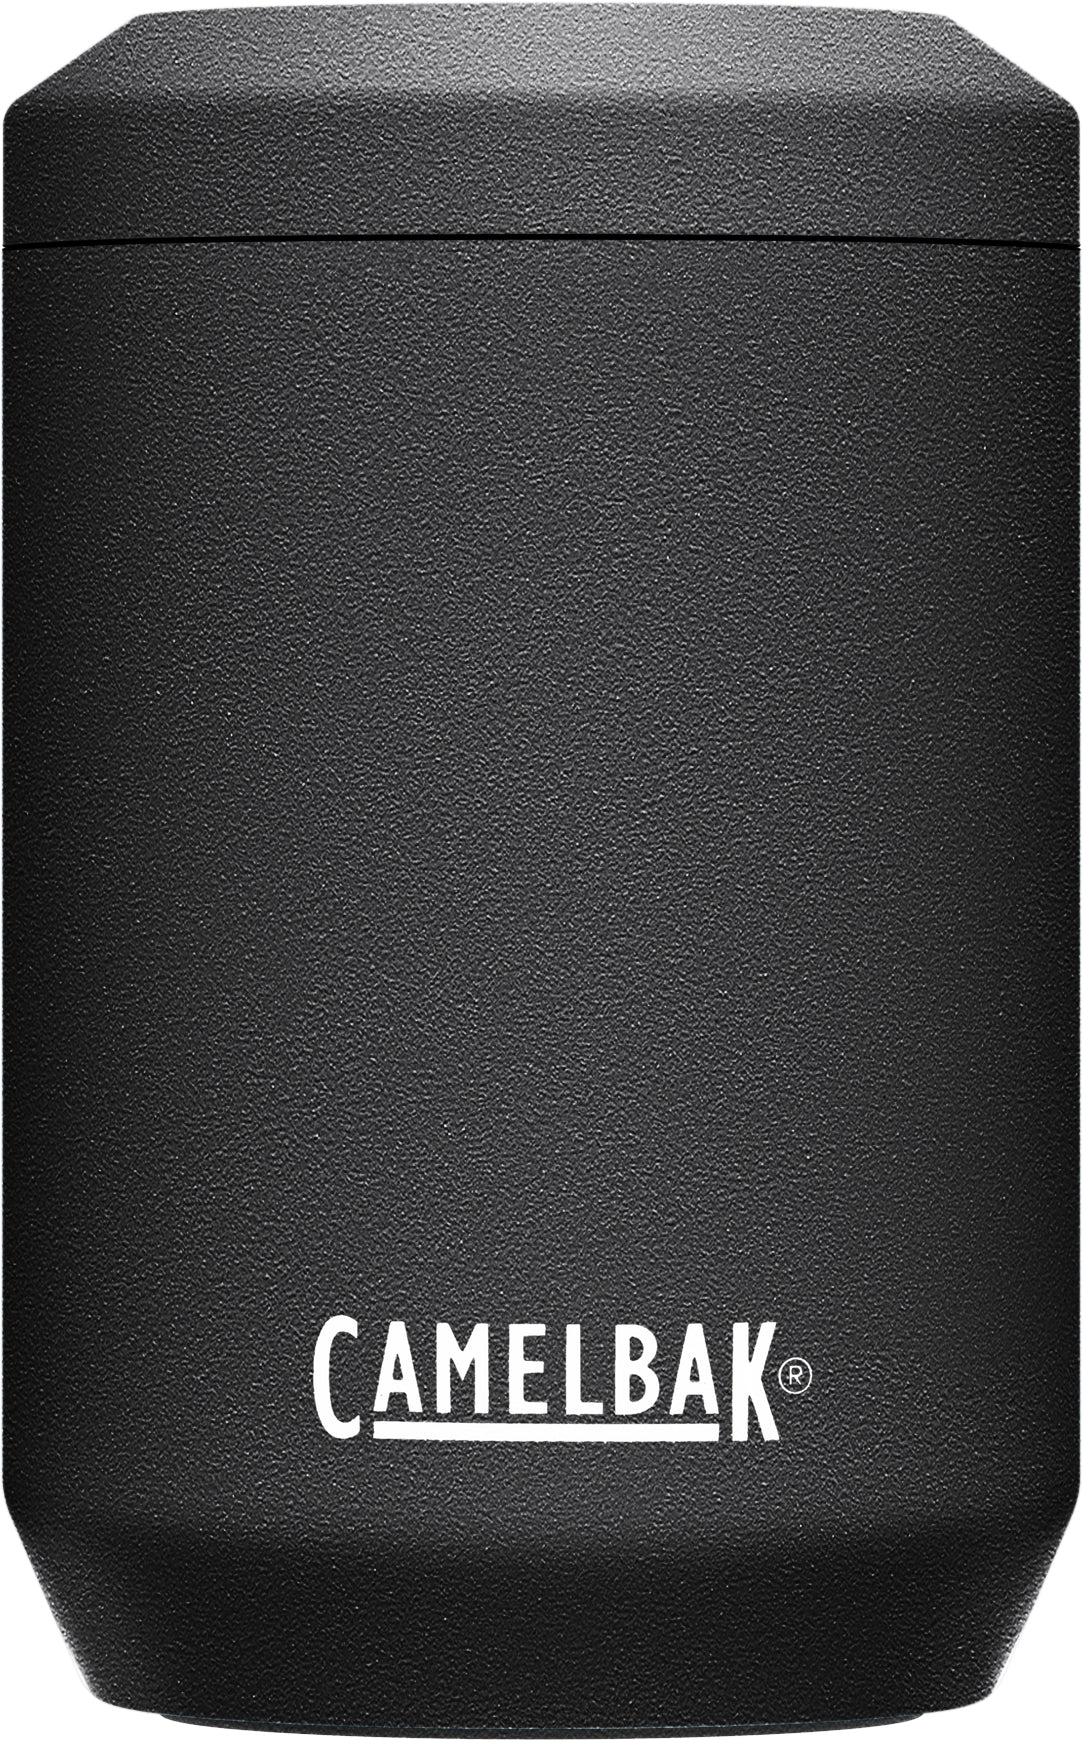 Camelbak|CAN_COOLER_VACUUM_INSULATED|Cycle_LM